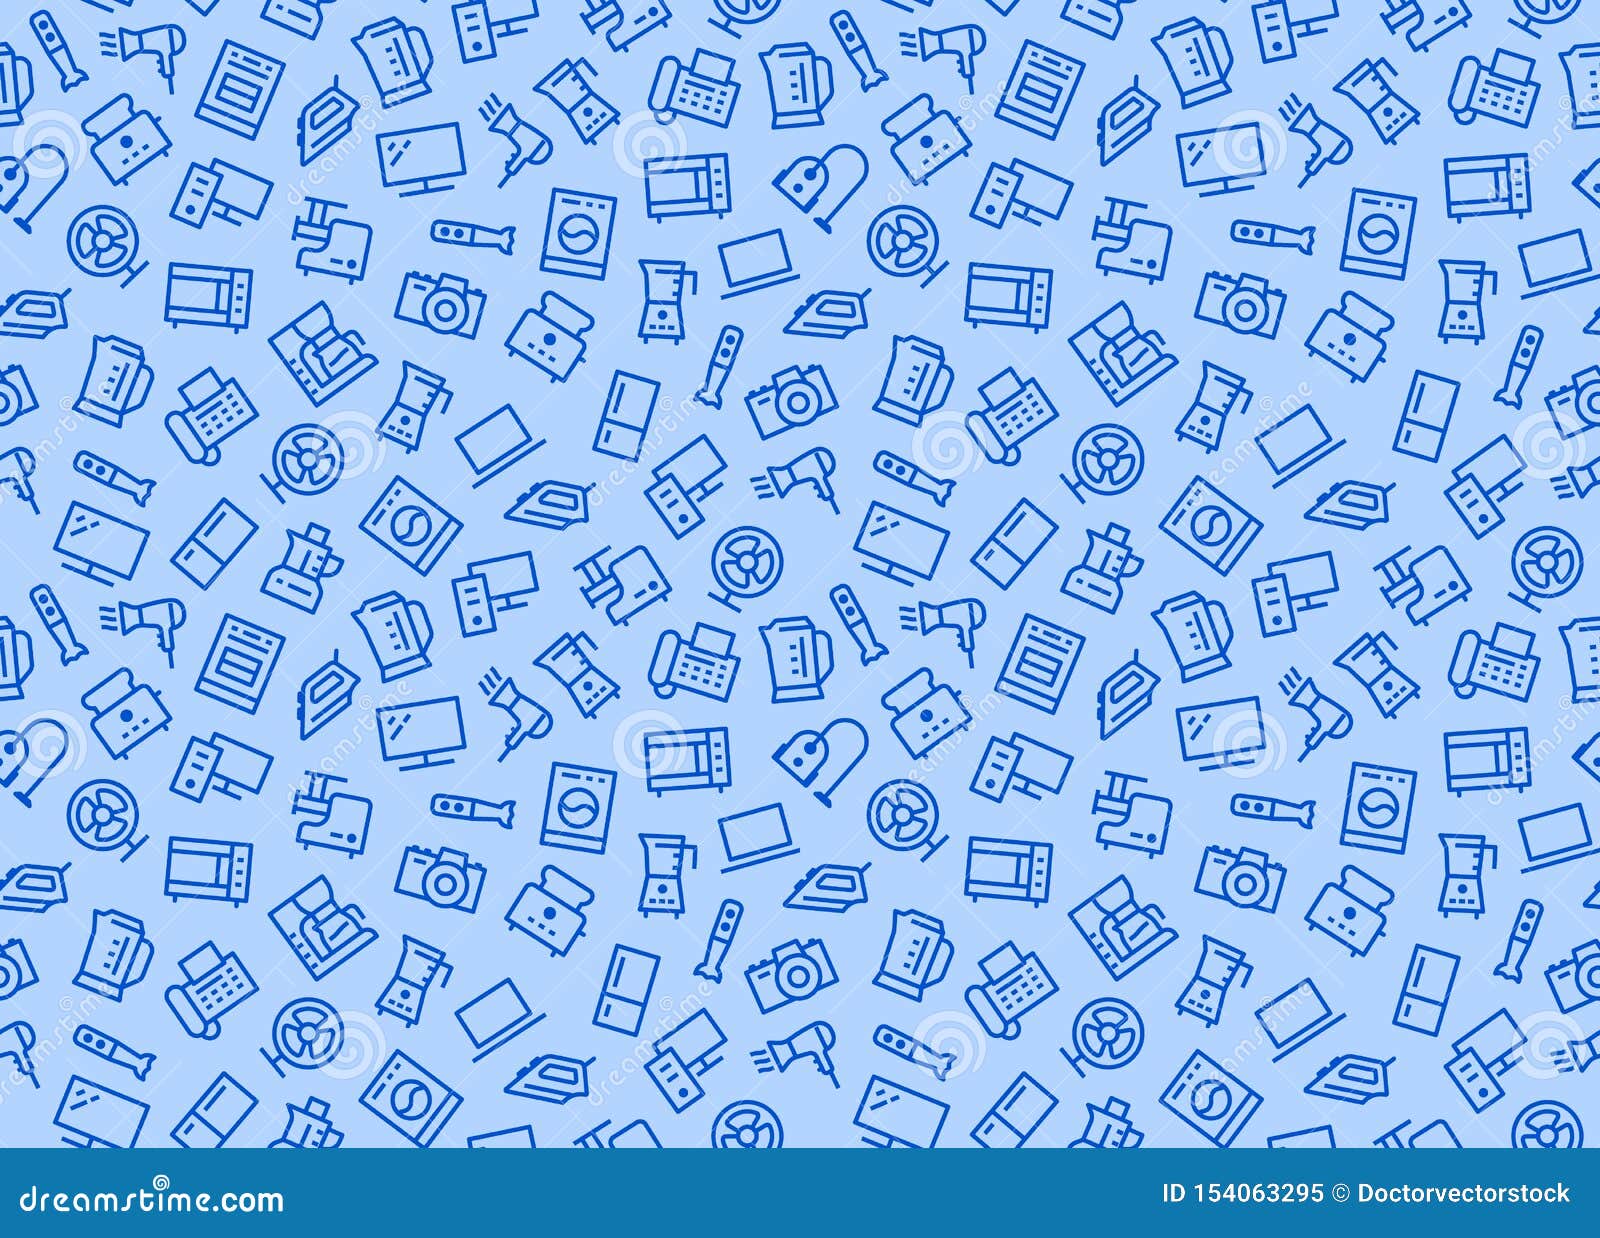 household appliances, electronics store seamless pattern with line icon.   flat style. included icons